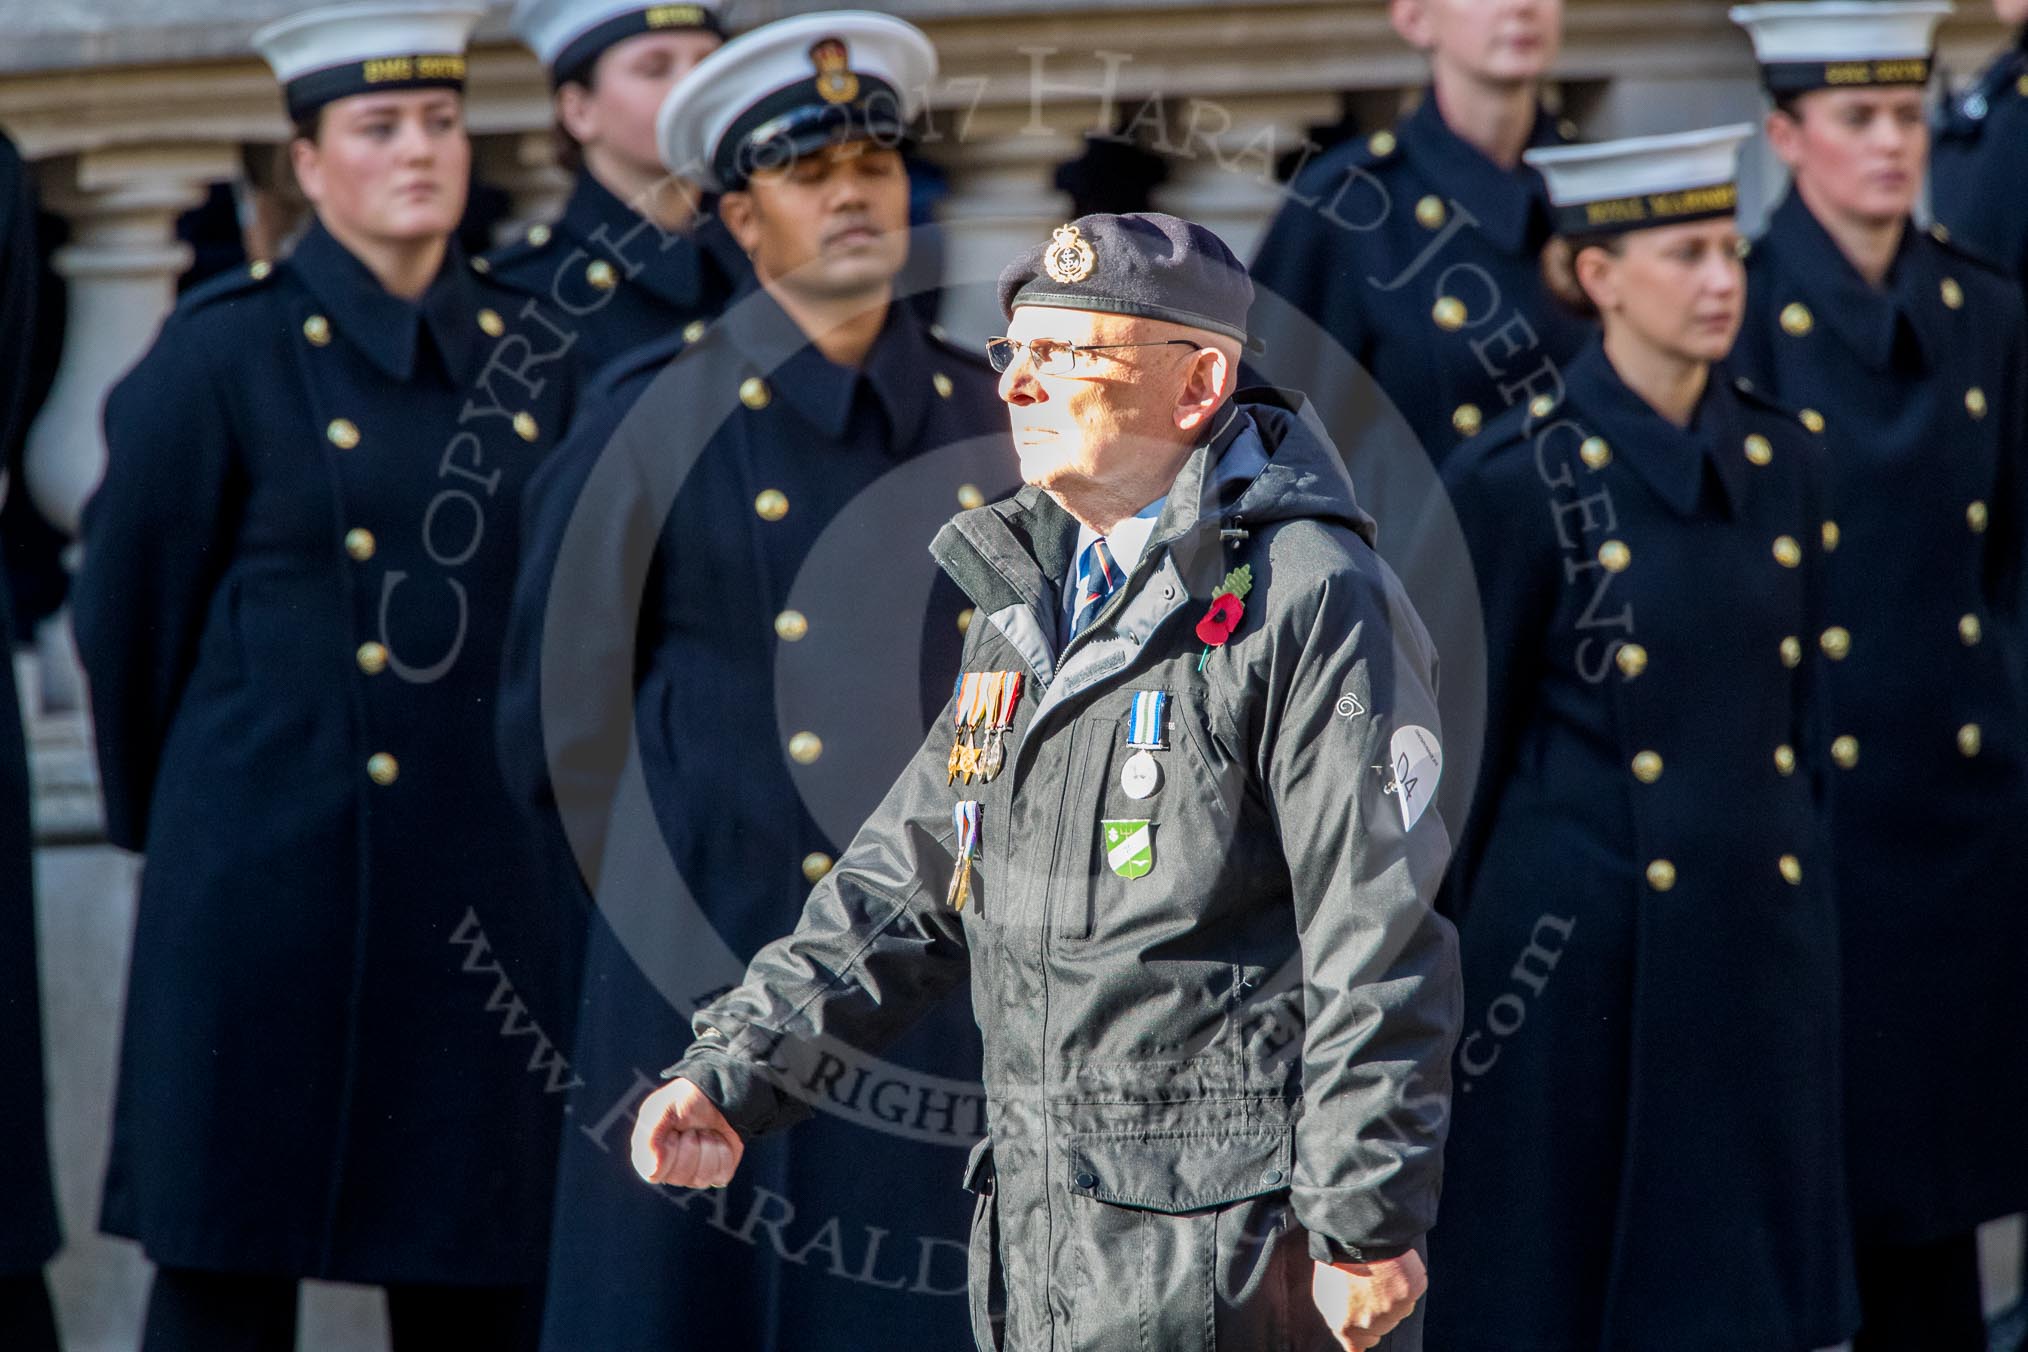 Association  of Jewish Ex-Servicemen and Women (Group D4, 27 members) during the Royal British Legion March Past on Remembrance Sunday at the Cenotaph, Whitehall, Westminster, London, 11 November 2018, 12:21.